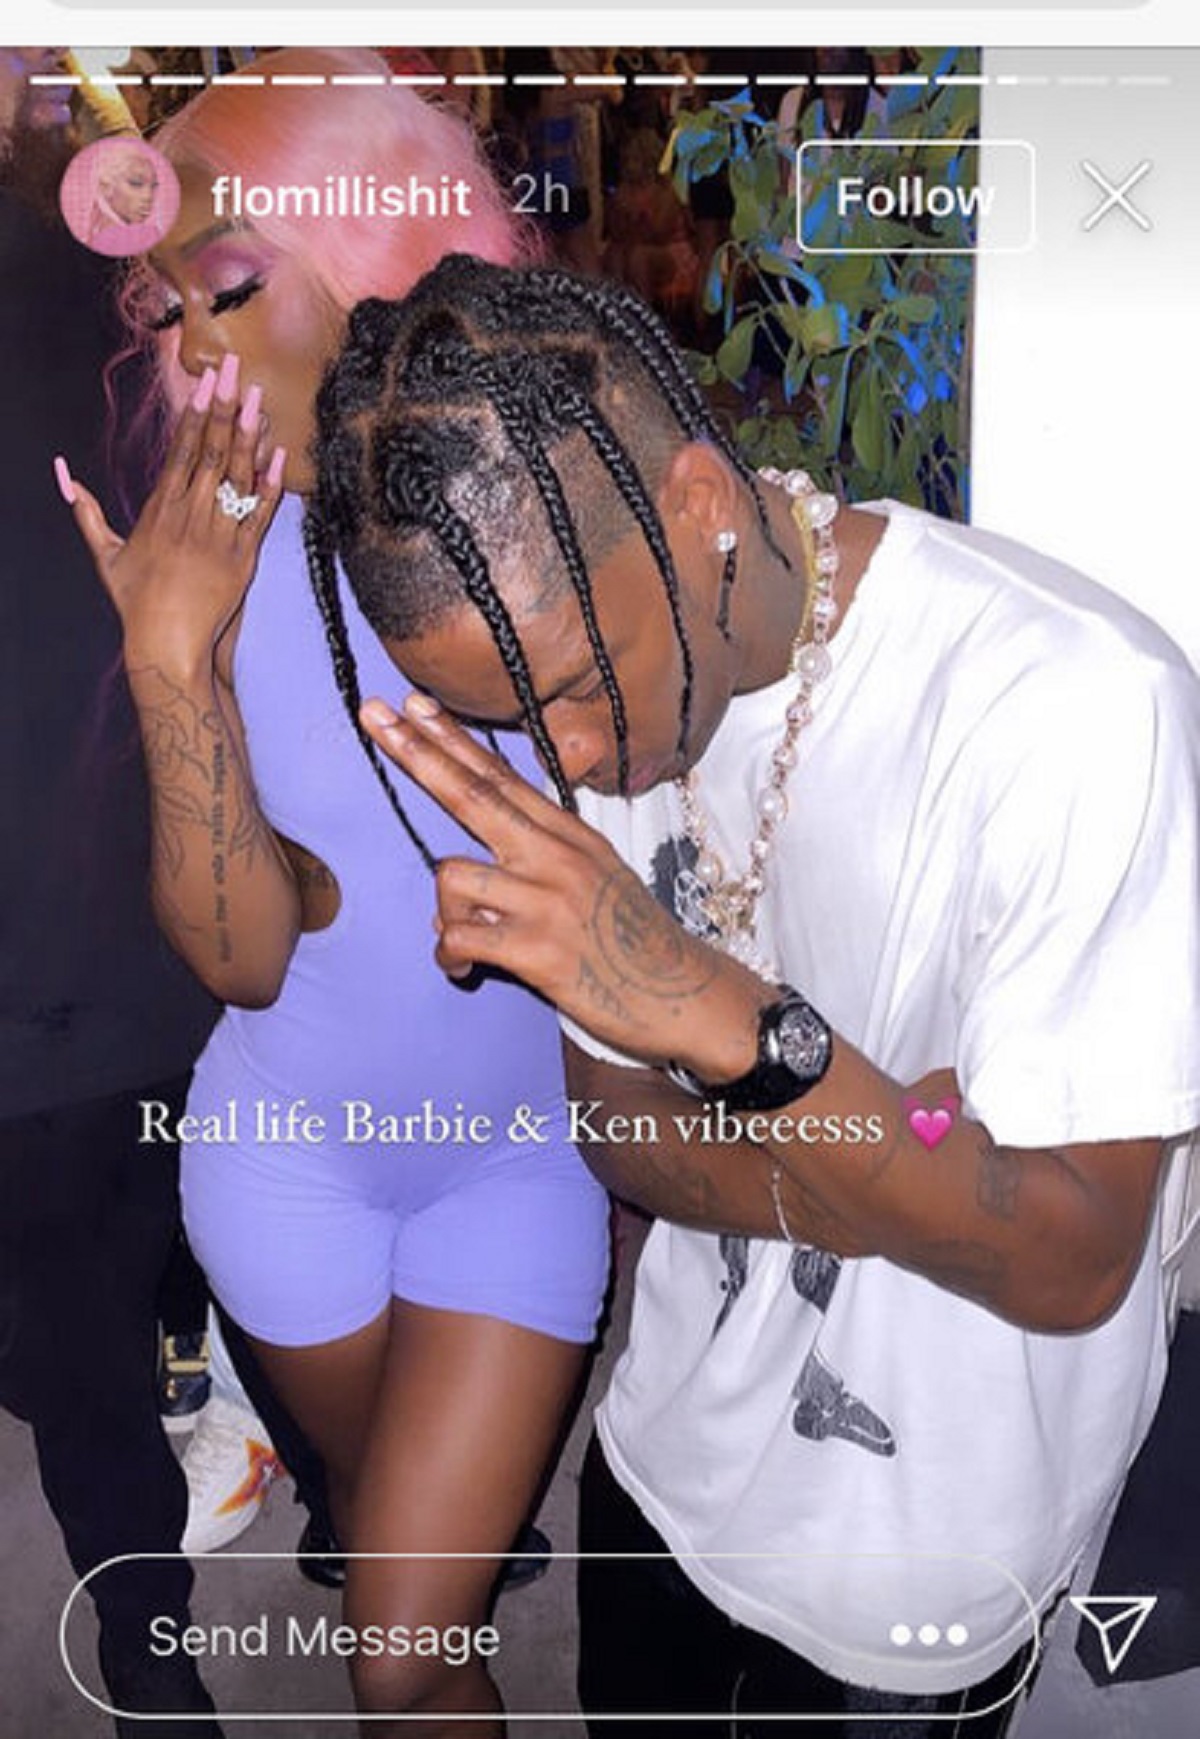 Flo Milli posts pic with Travis Scott on her IG Story leading people to believe they are dating